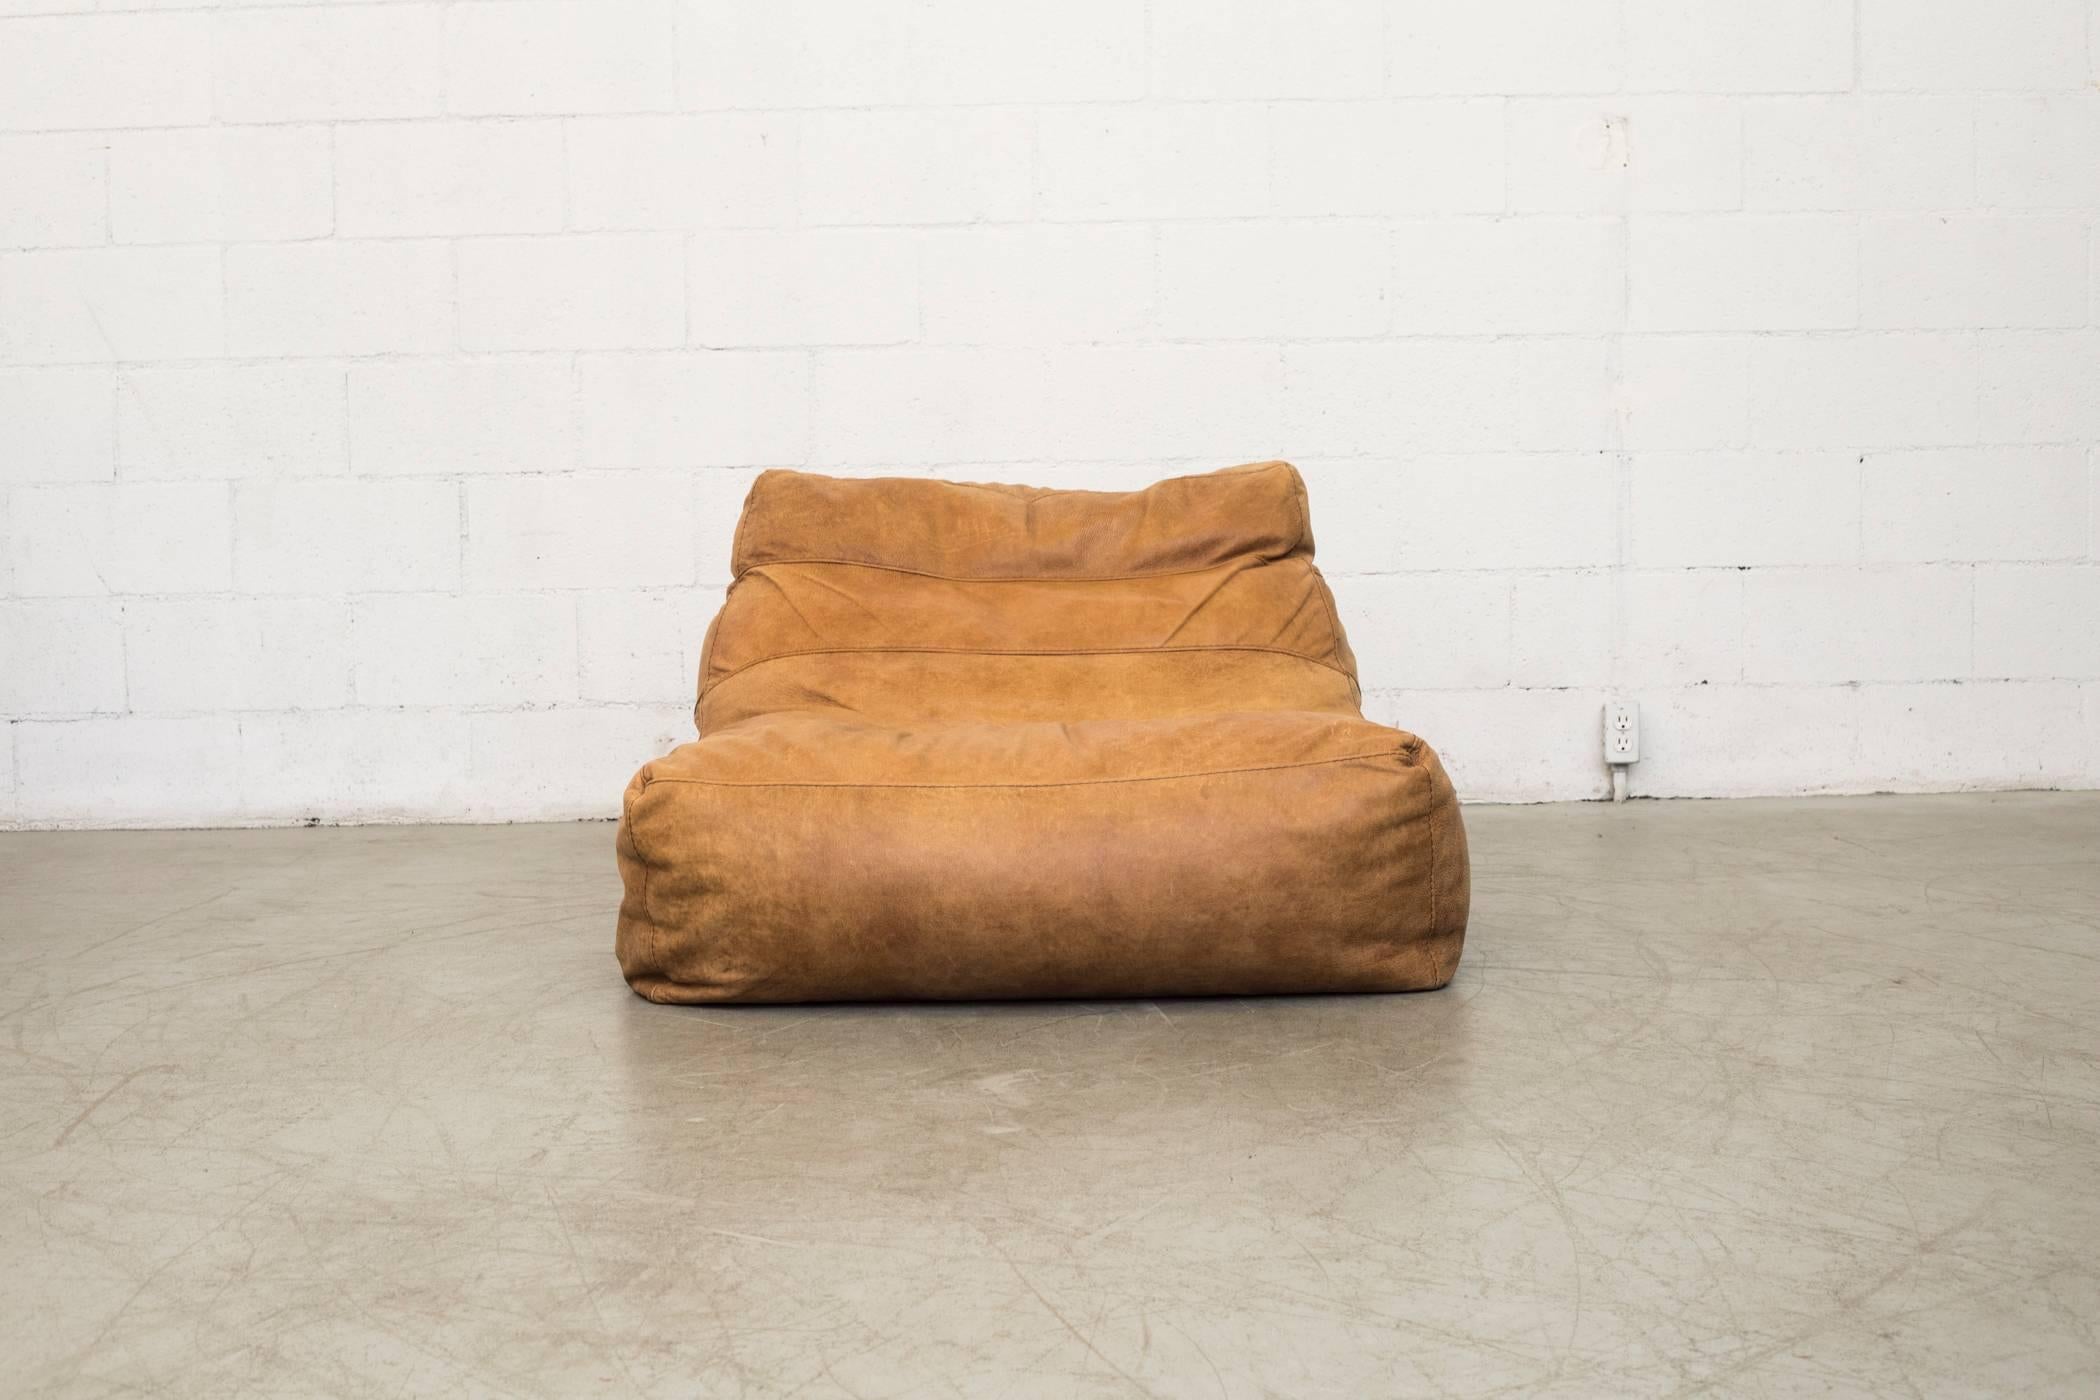 Warm brown leather bean bag lounge chair. Back strap detail. Fantastic patina. Super comfortable. Similar one available in lighter leather (S709 N). Listed separately.